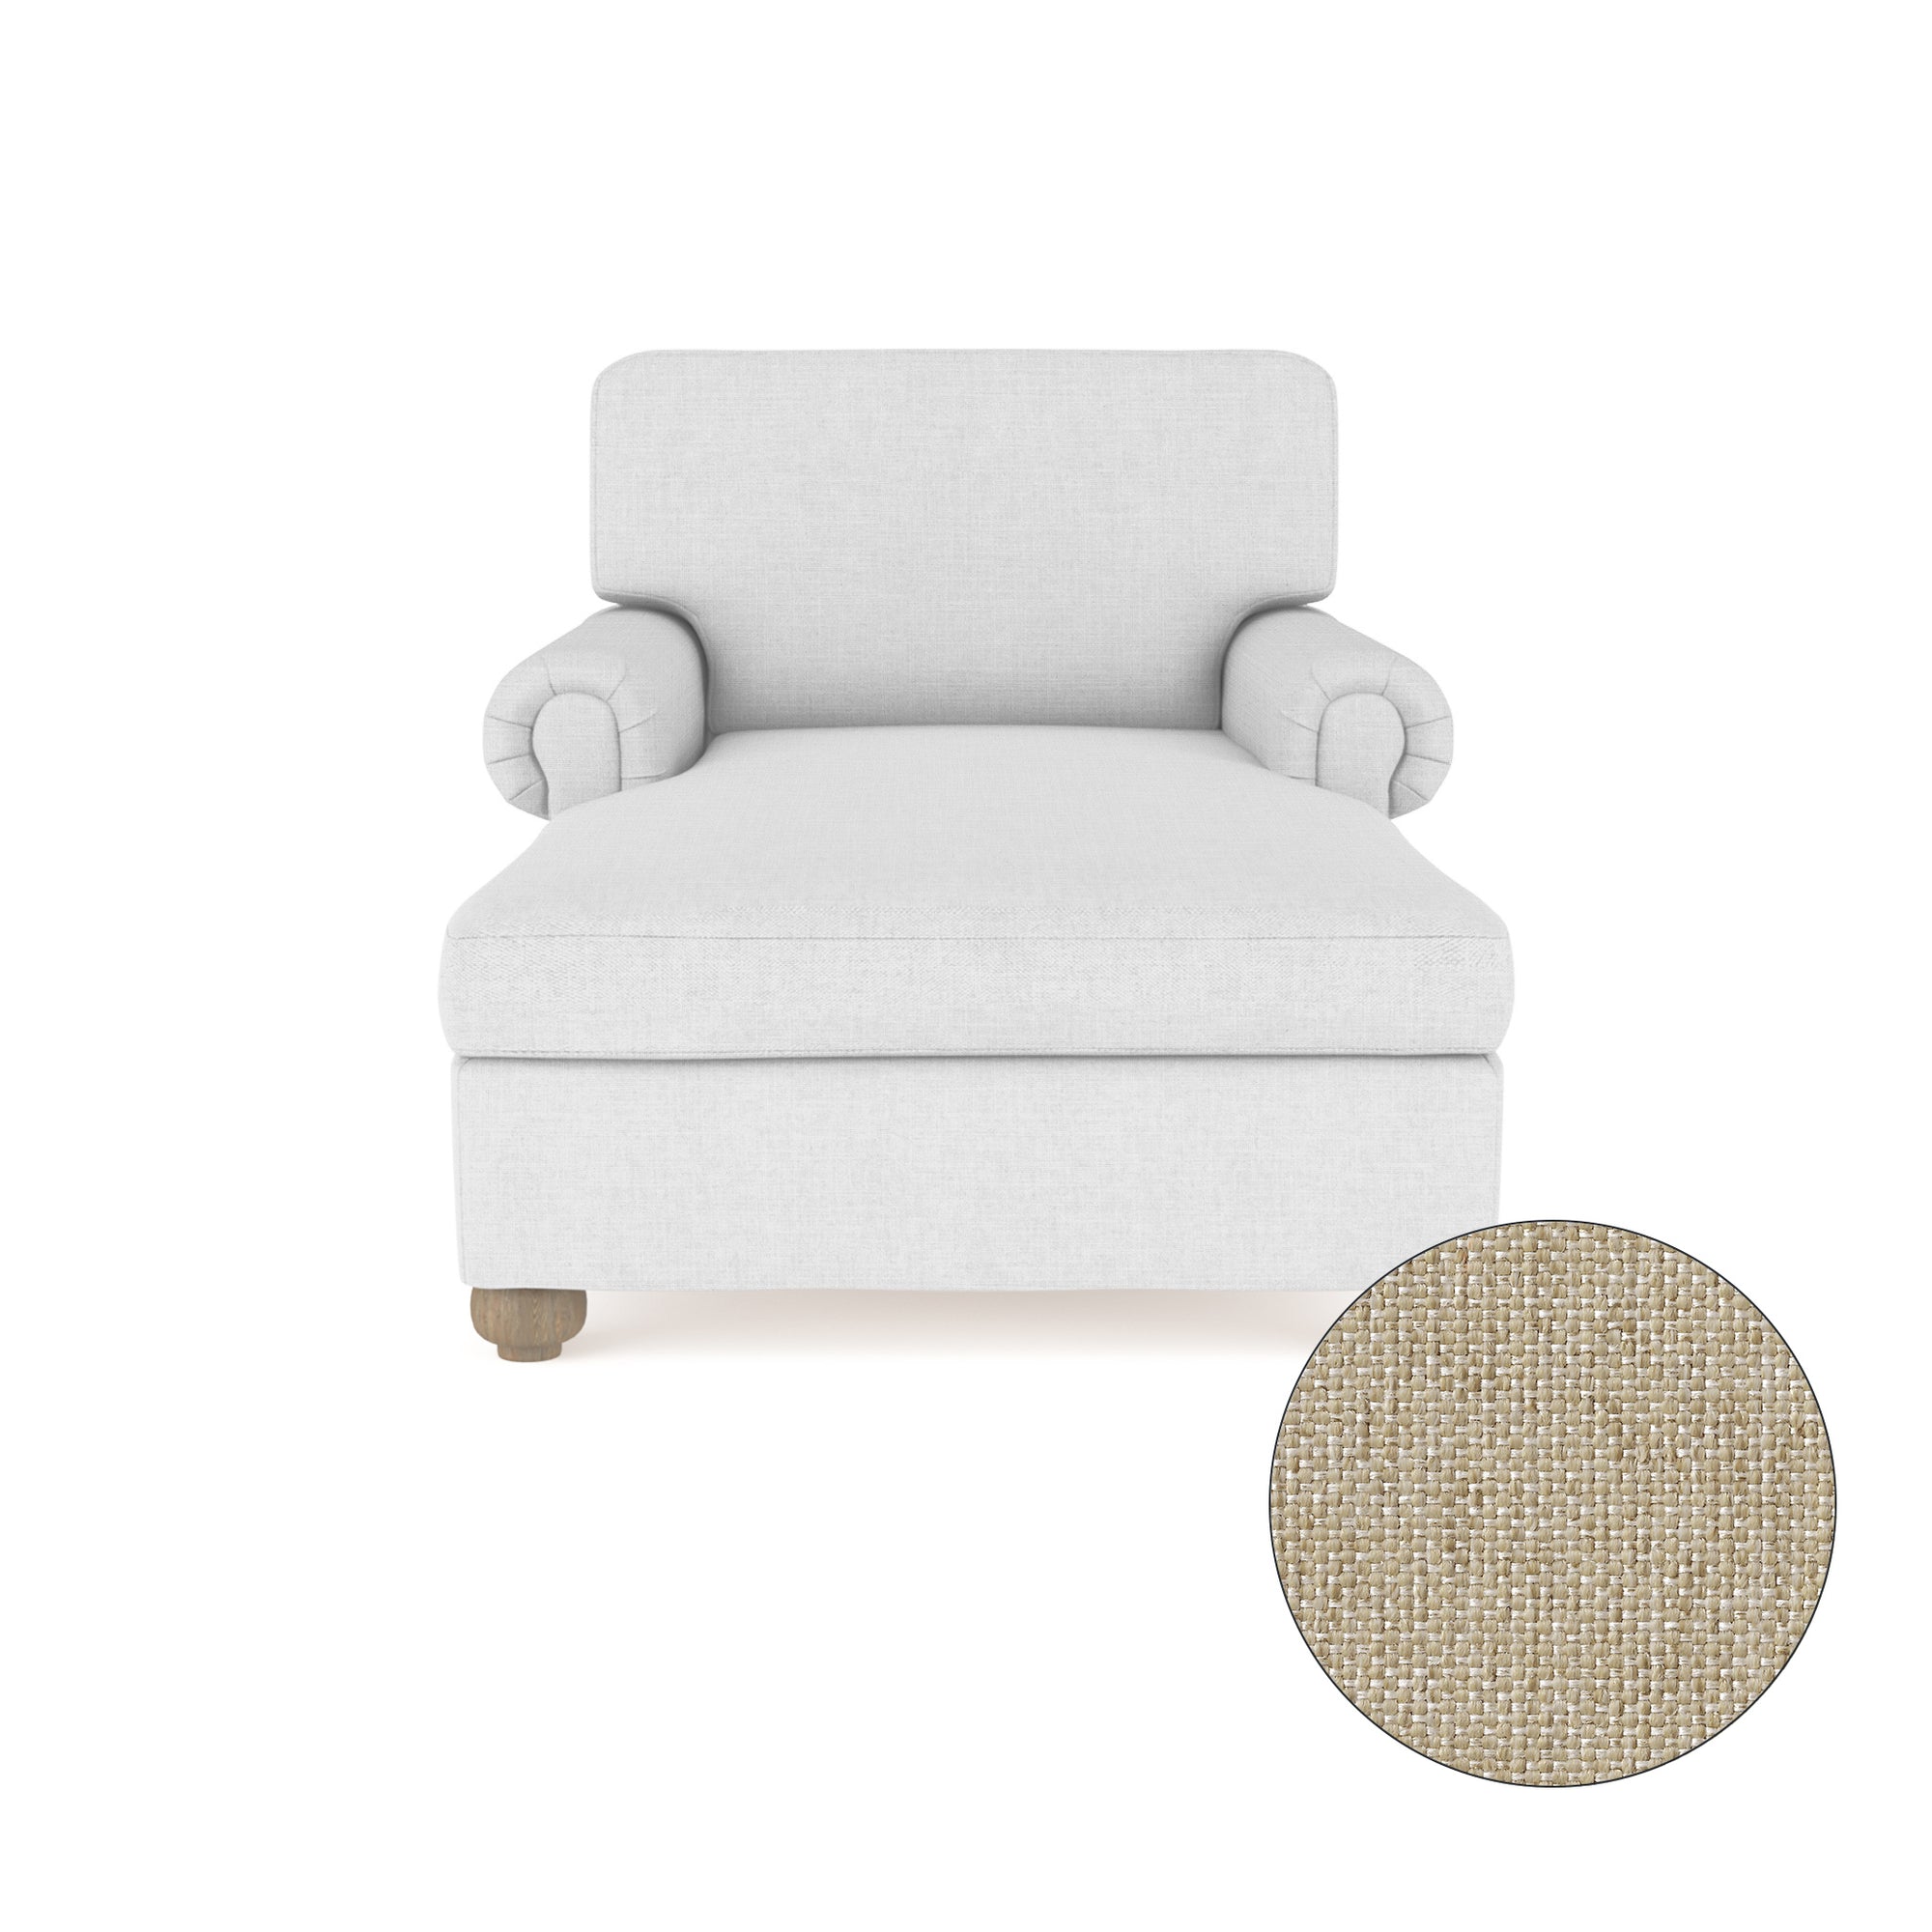 Leroy Chaise - Oyster Pebble Weave Linen